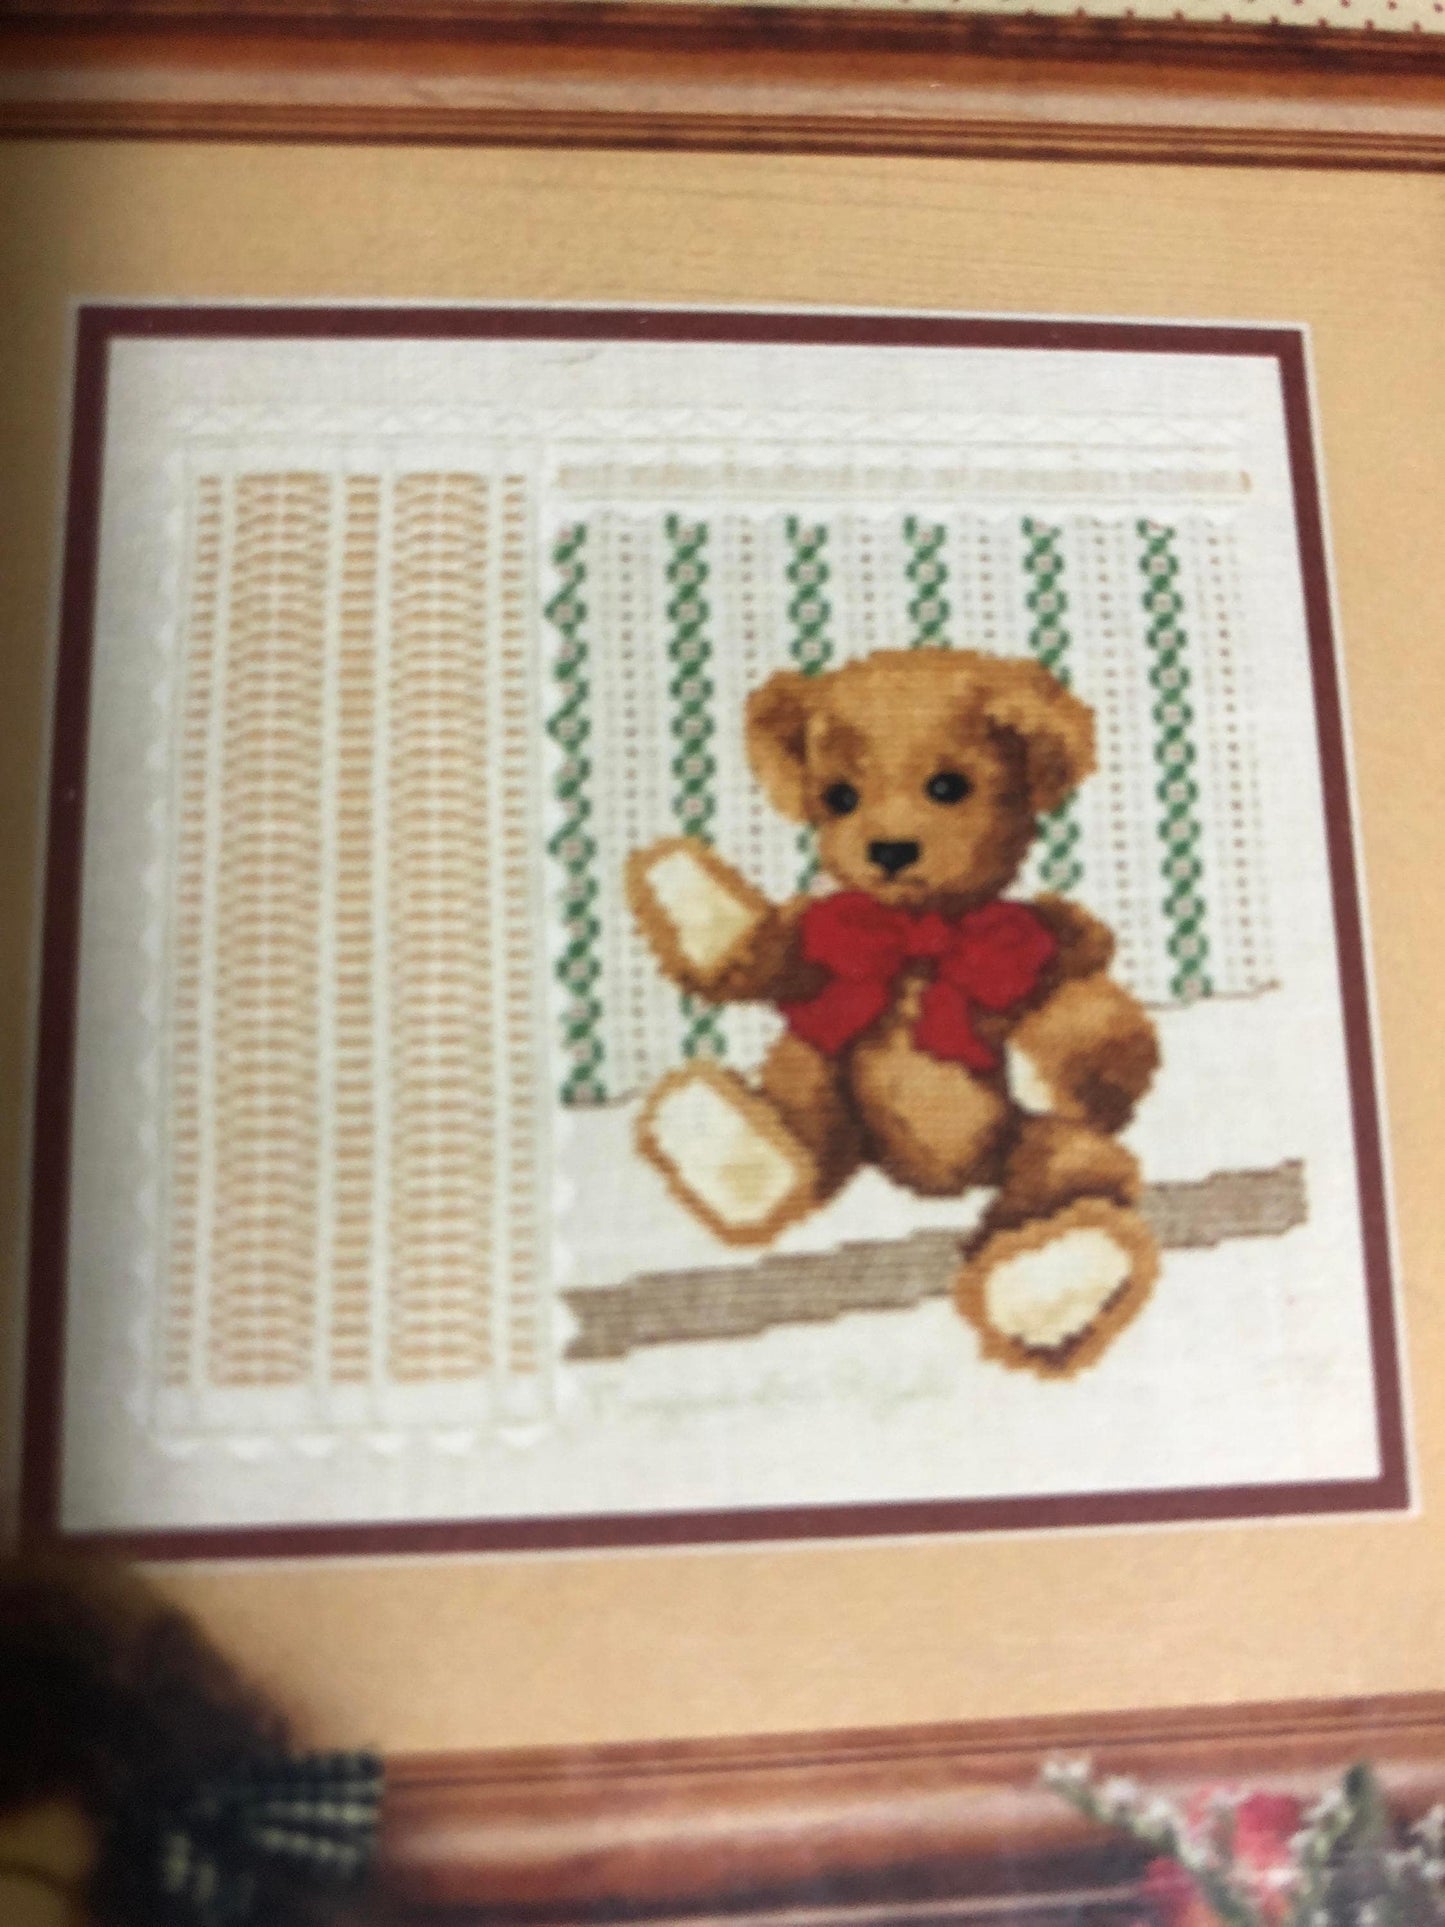 Designs by Margaret Lee, "Bear By the Window" Counted Cross Stitch Pattern